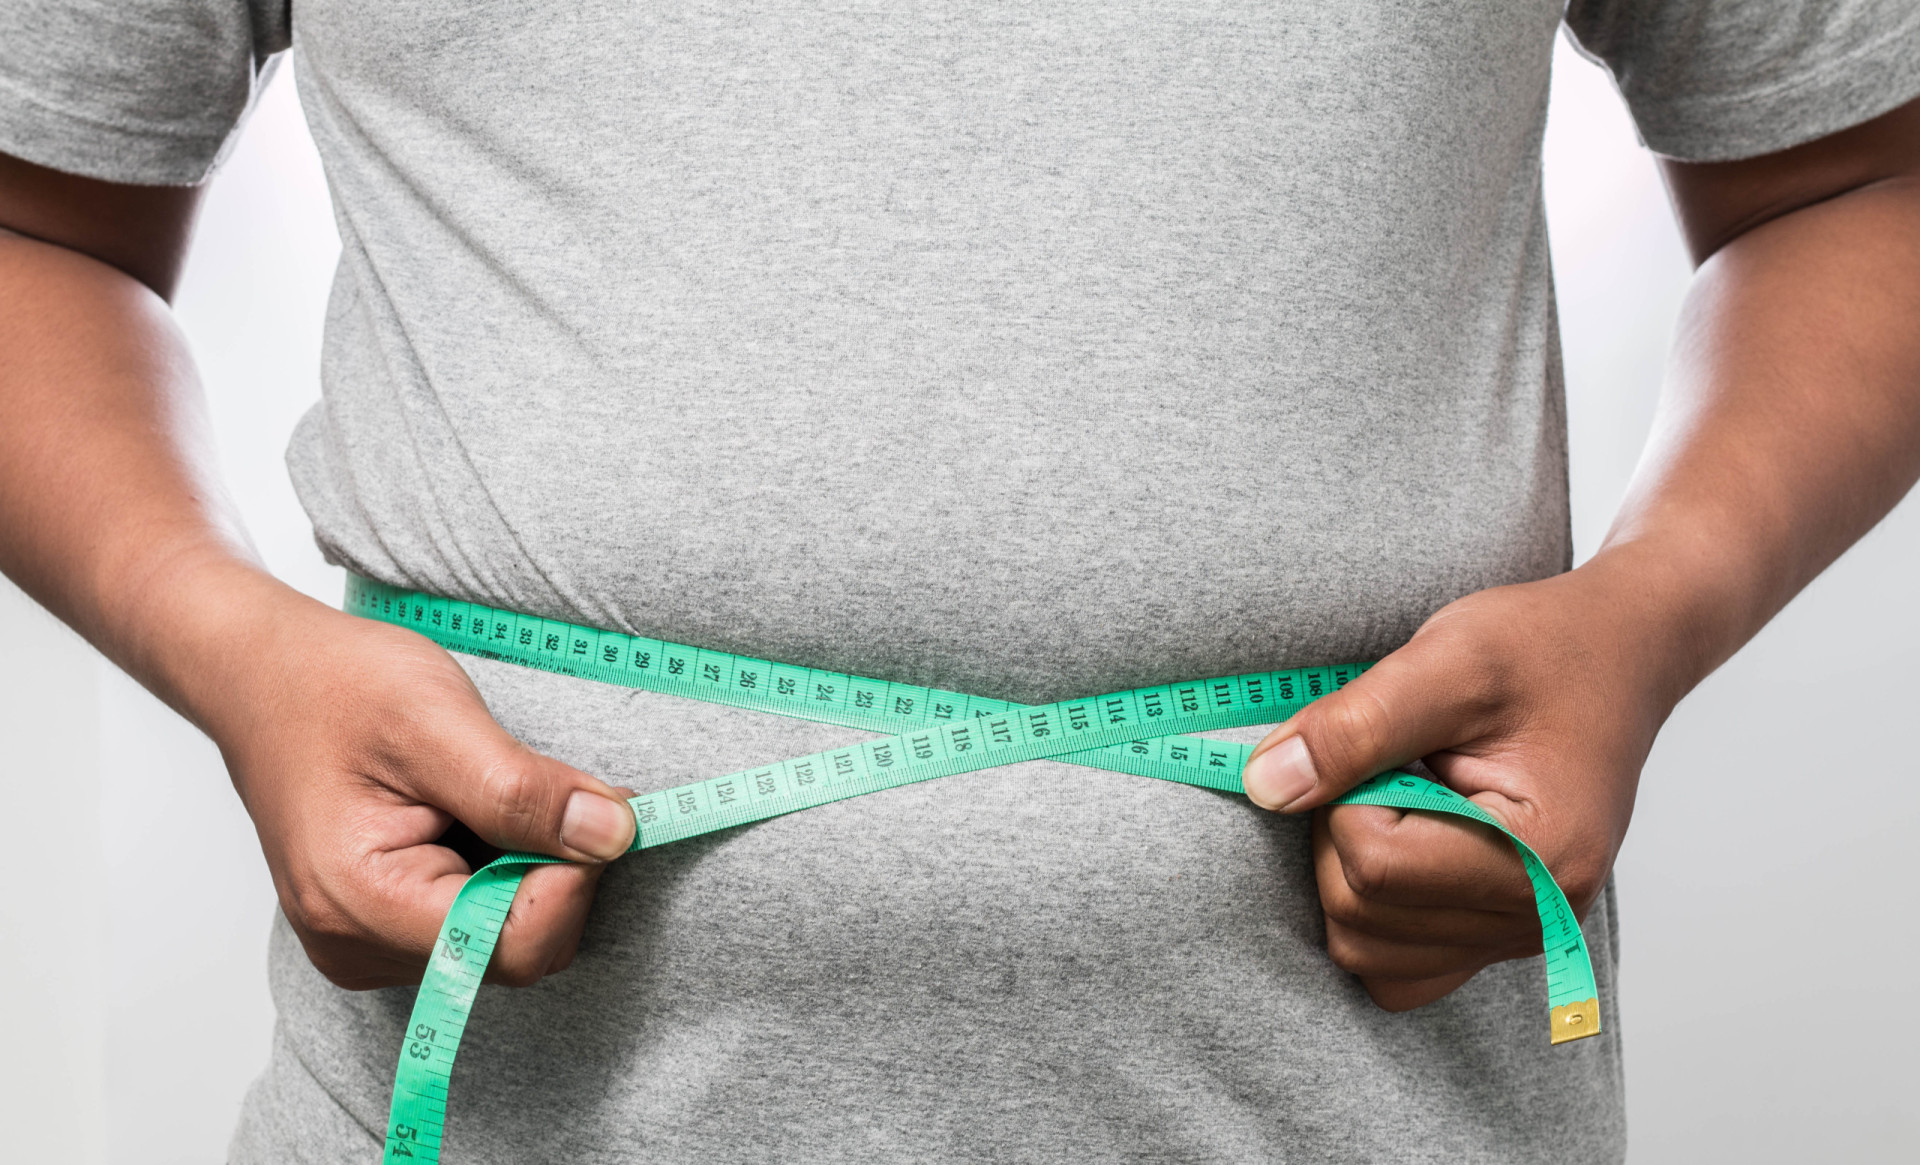 <p>Being overweight increases the pressure in the veins in the pelvis and legs.</p><p>You may also like:<a href="https://www.starsinsider.com/n/424976?utm_source=msn.com&utm_medium=display&utm_campaign=referral_description&utm_content=540572en-en"> Wuhan-400: was coronavirus predicted four decades ago?</a></p>